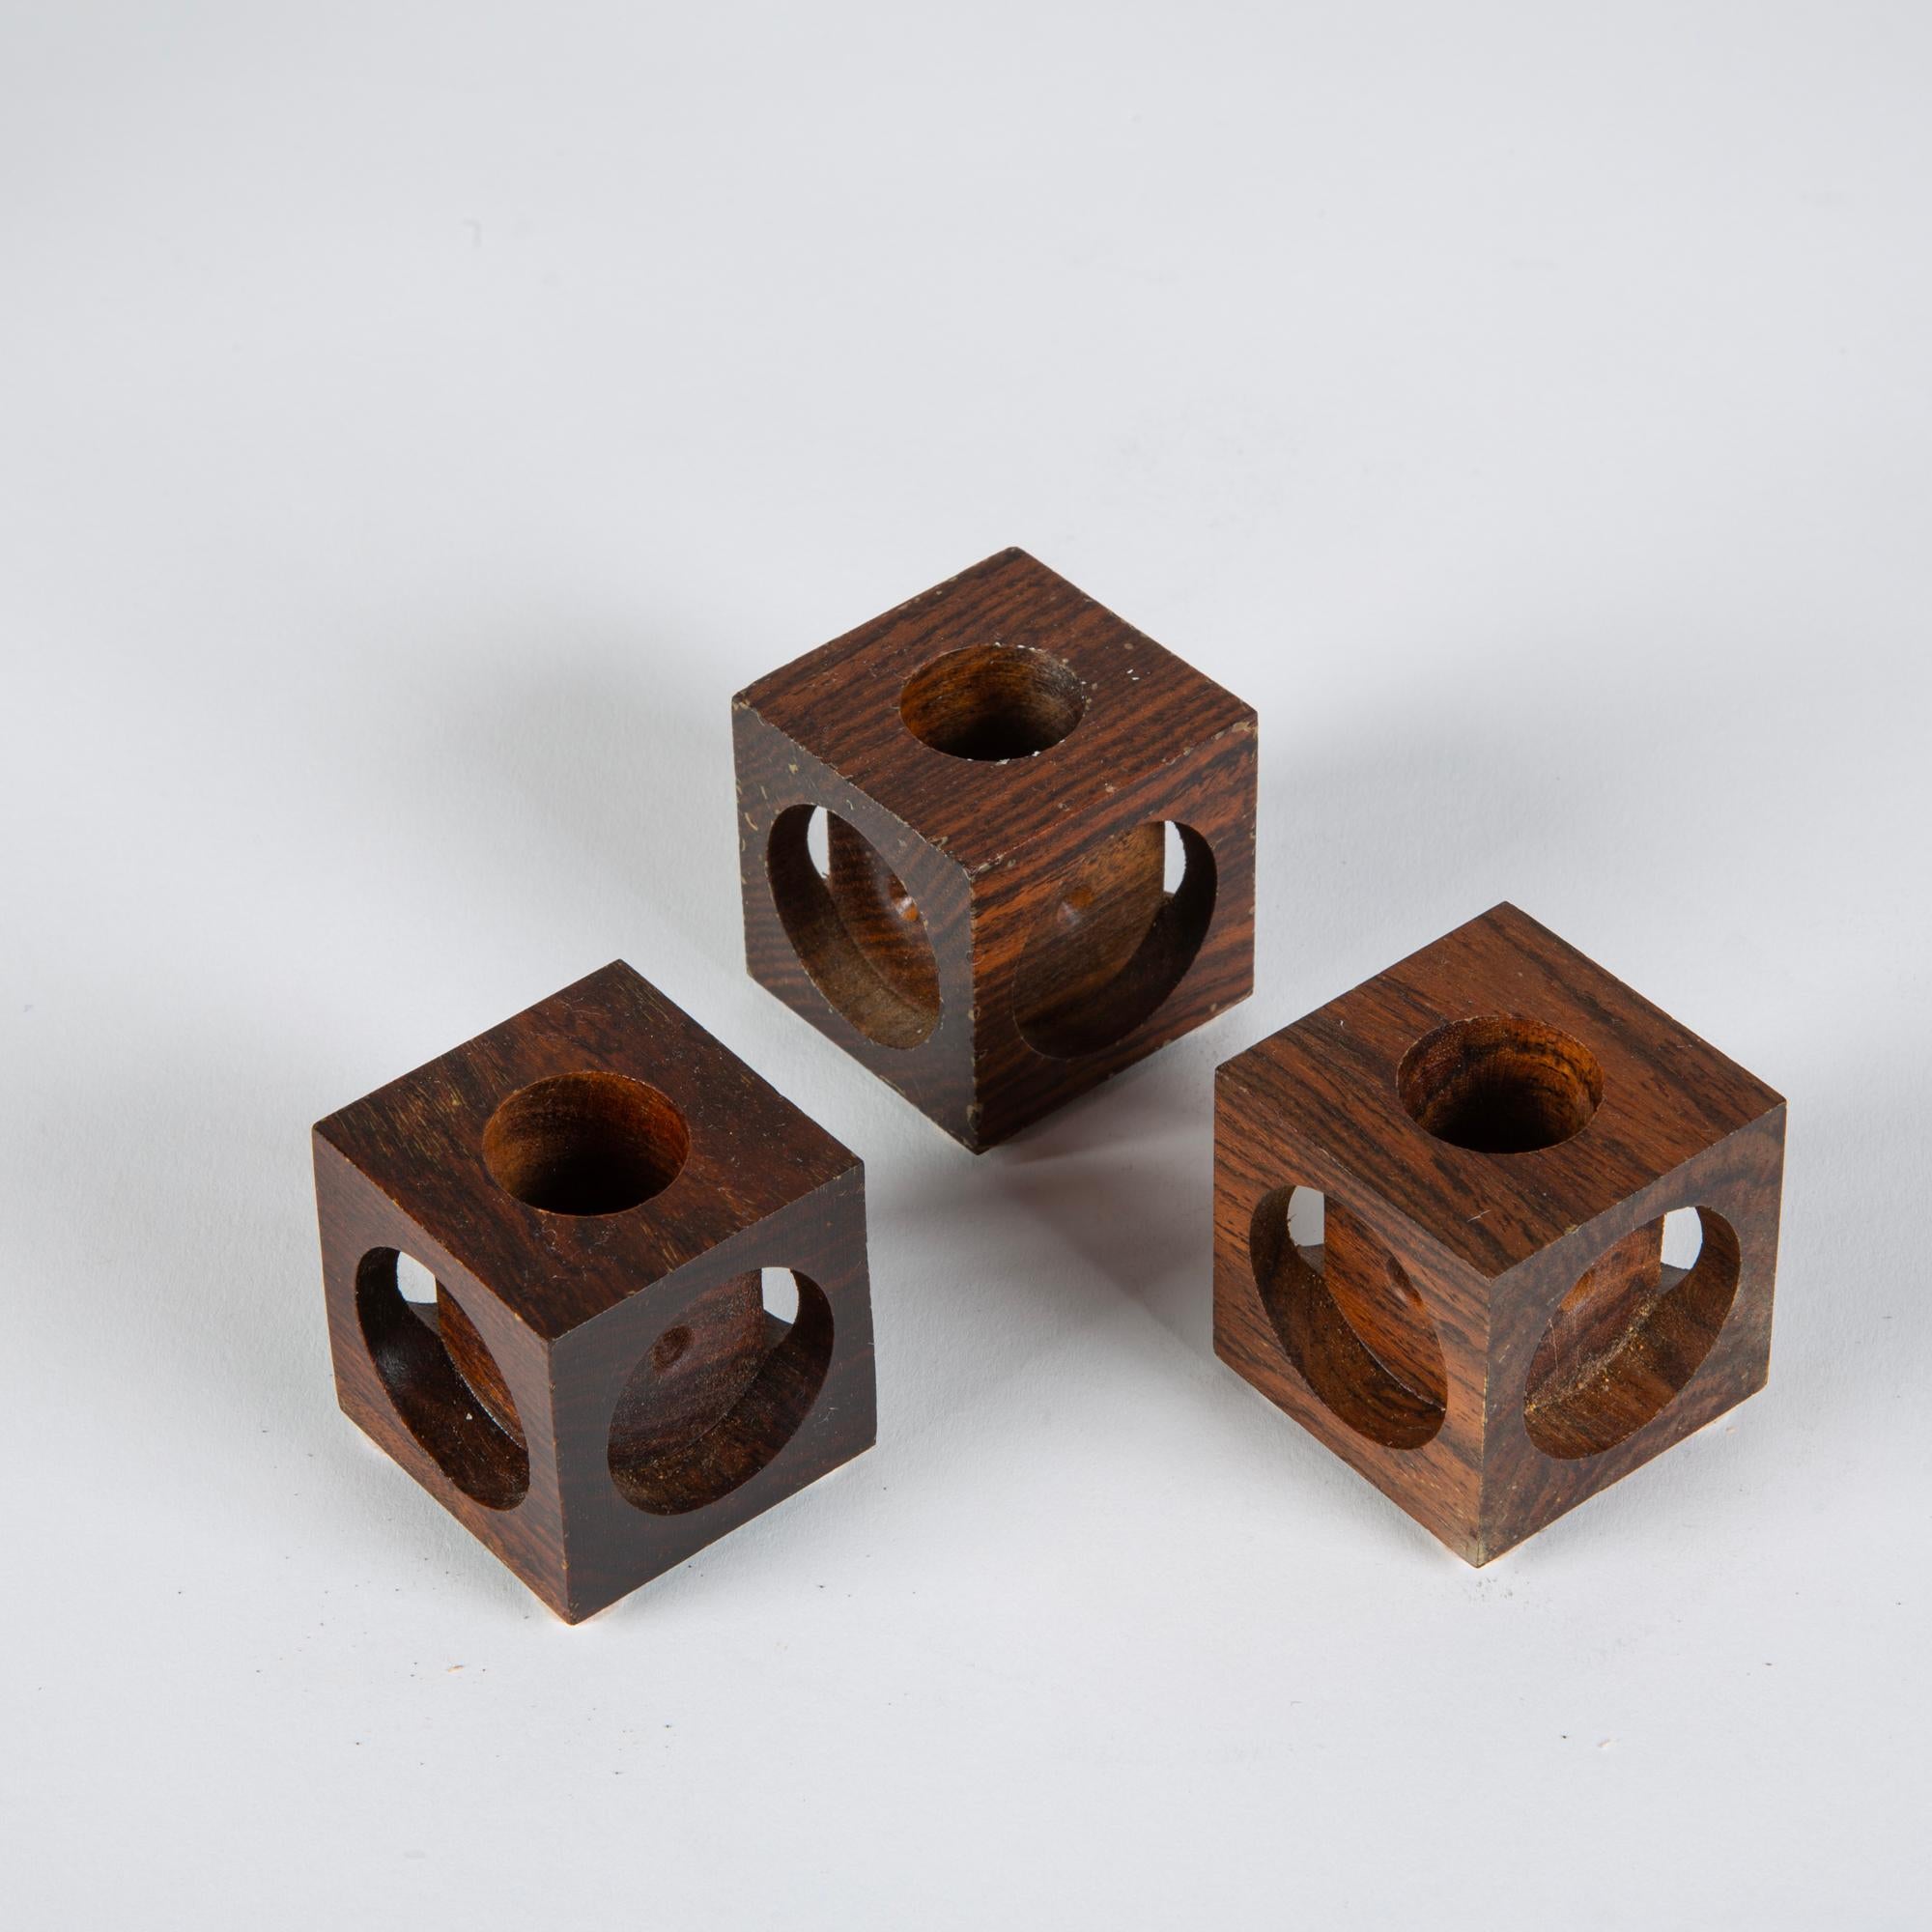 Set of three Don Shoemaker for Señal cocobolo candle holders. The hand carved minimalist rosewood candle holders feature a geometric block design with circular cutout design on each side. The top of each block has a carving in the center for a